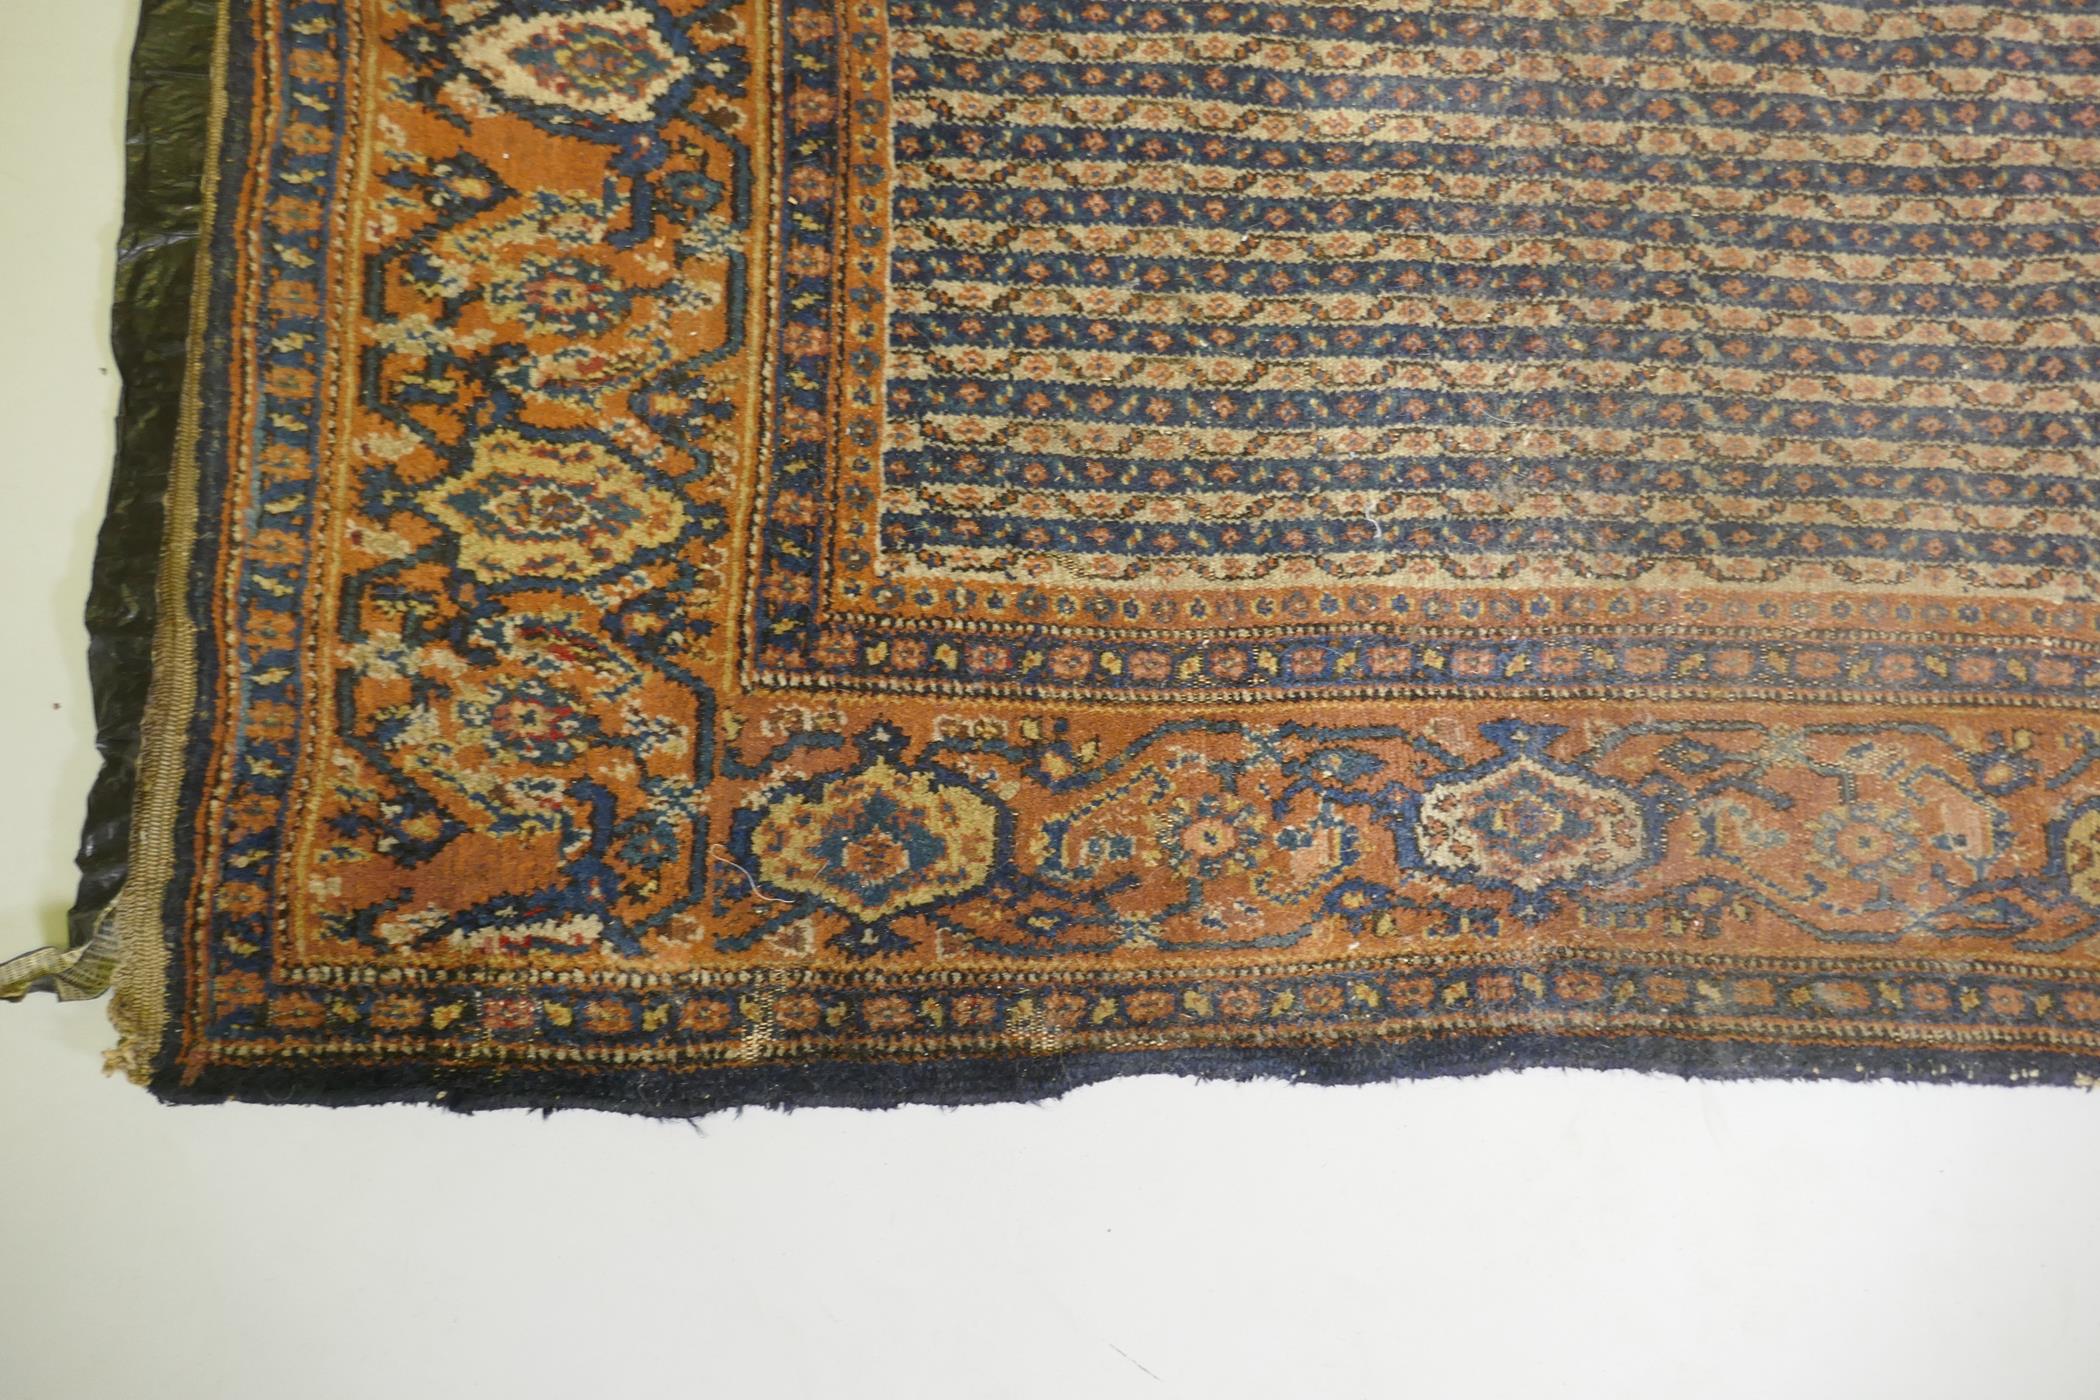 An antique Persian wool carpet with striped design and red borders, worn, 130 x 190 - Image 2 of 3